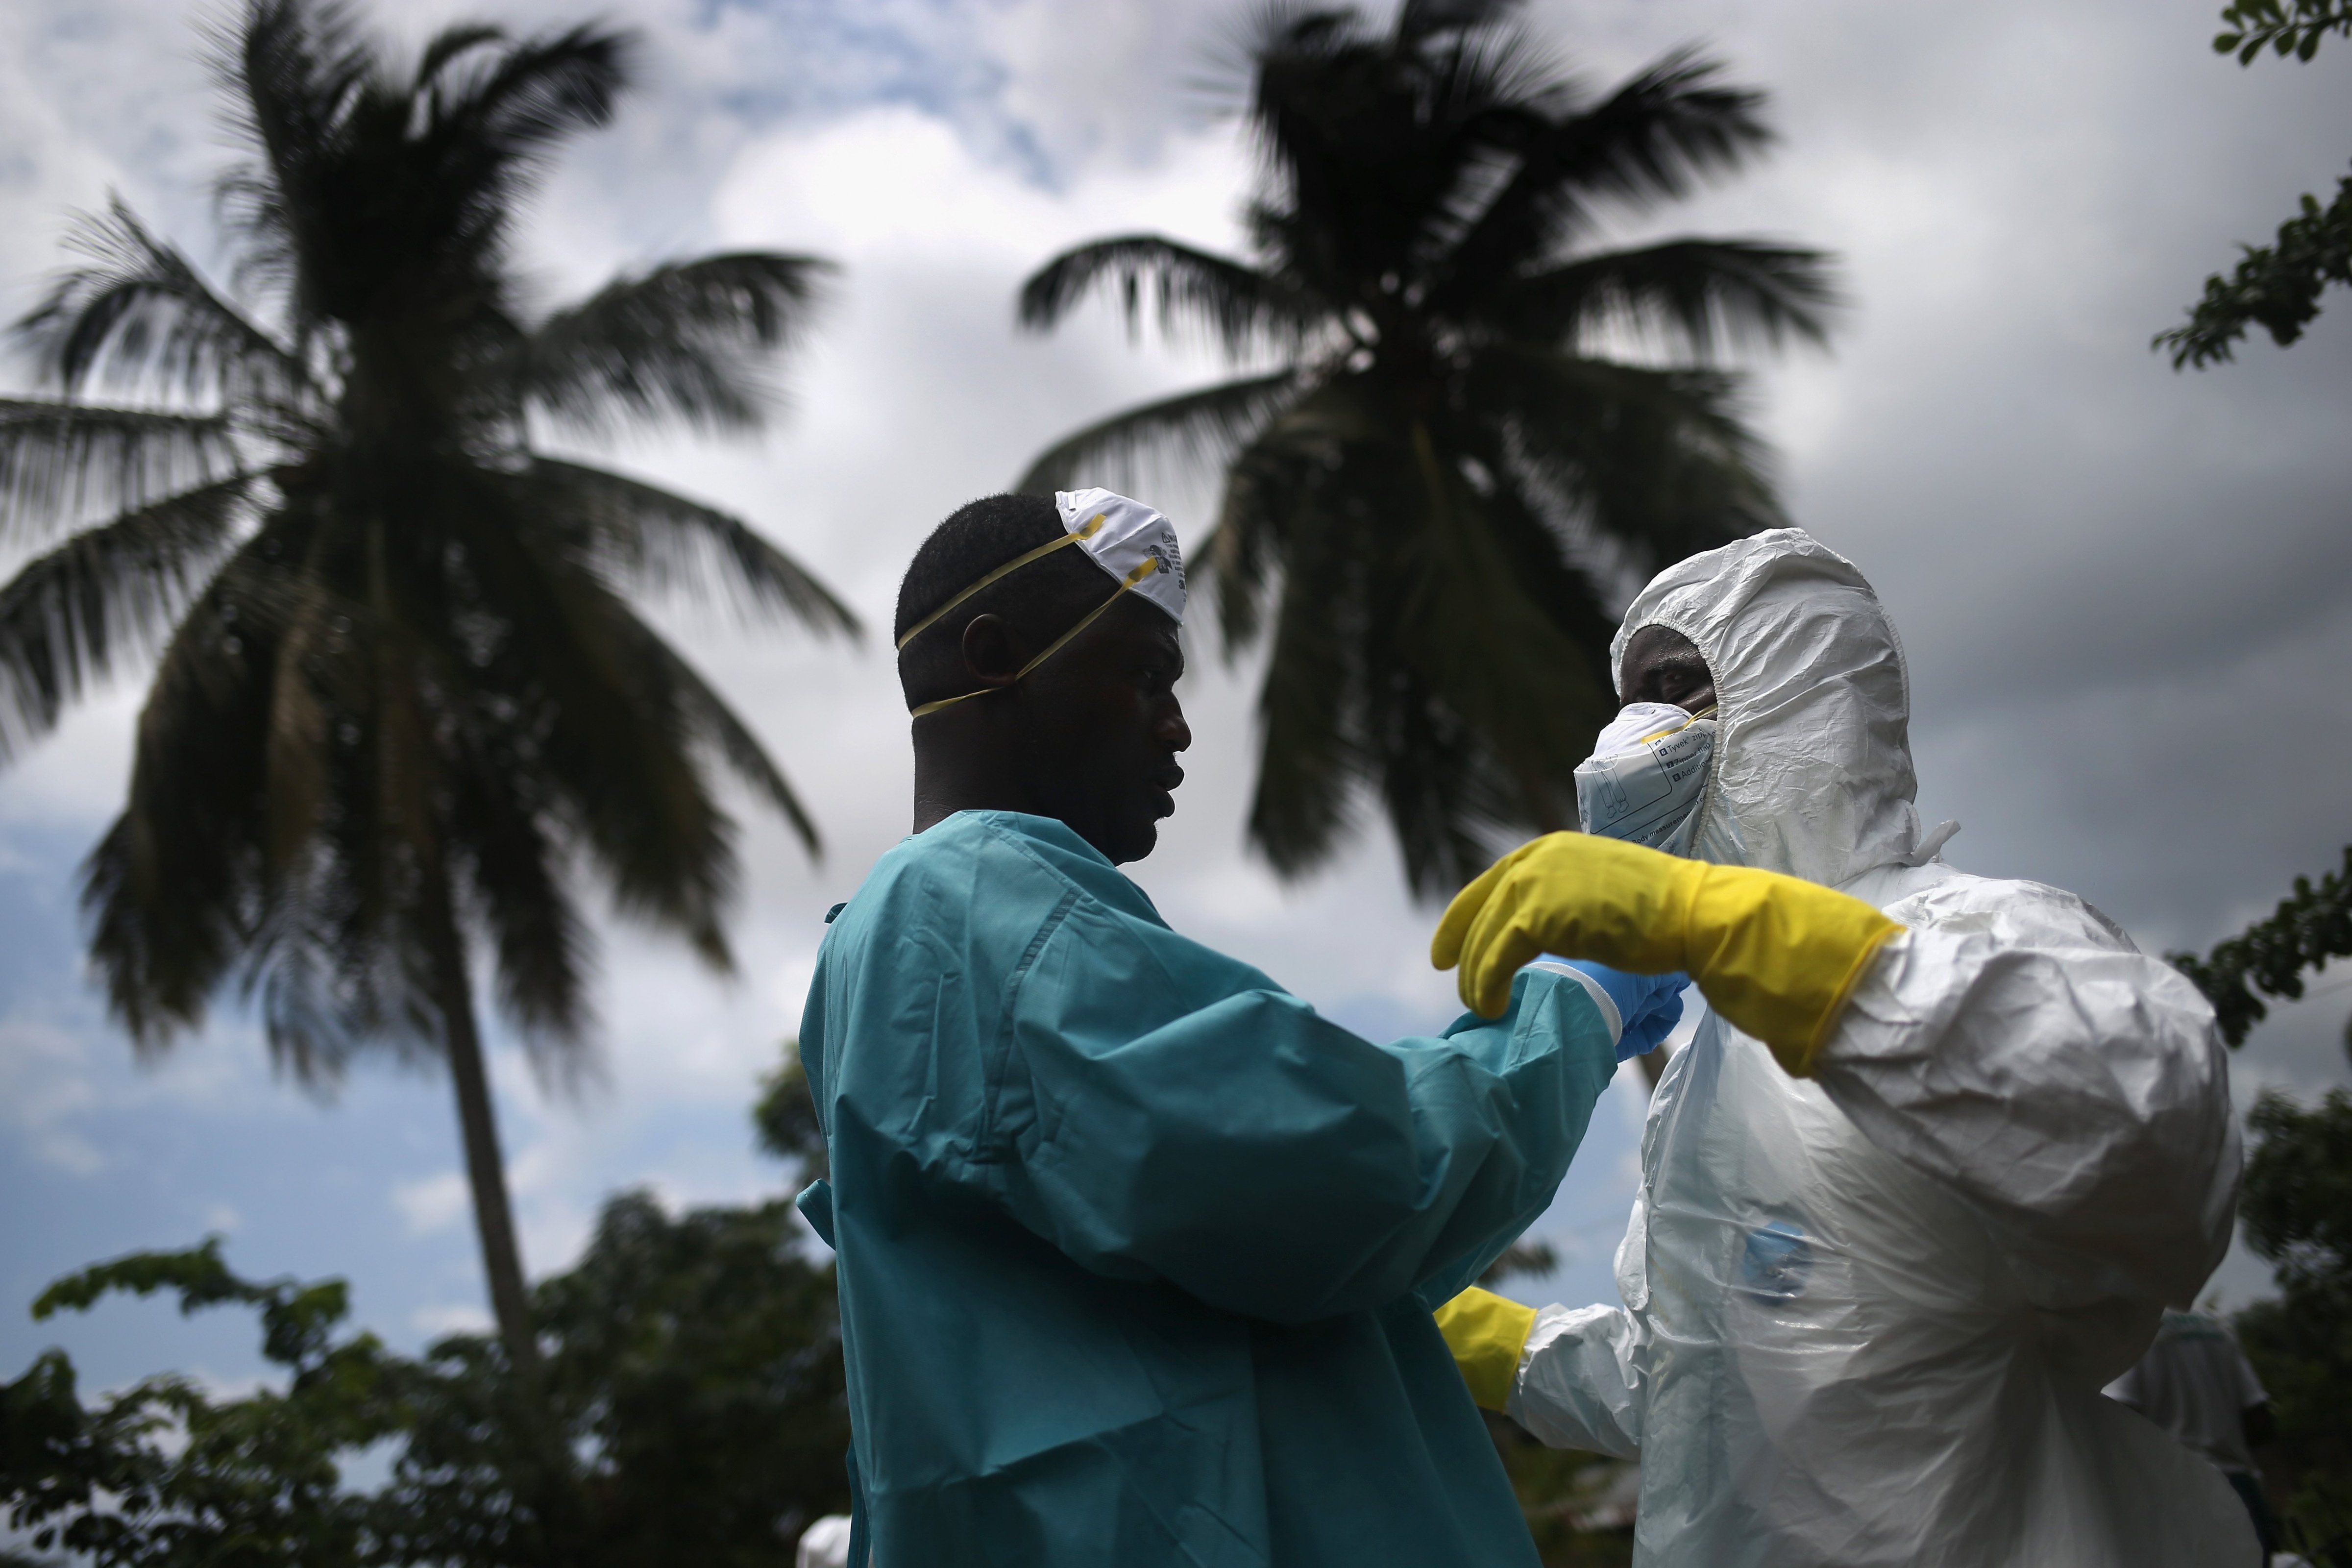 An Ebola burial team dresses in protective clothing before collecting the body of a woman from her home in the New Kru Town suburb of Monrovia, Liberia on Oct. 10, 2014 (John Moore—Getty Images)